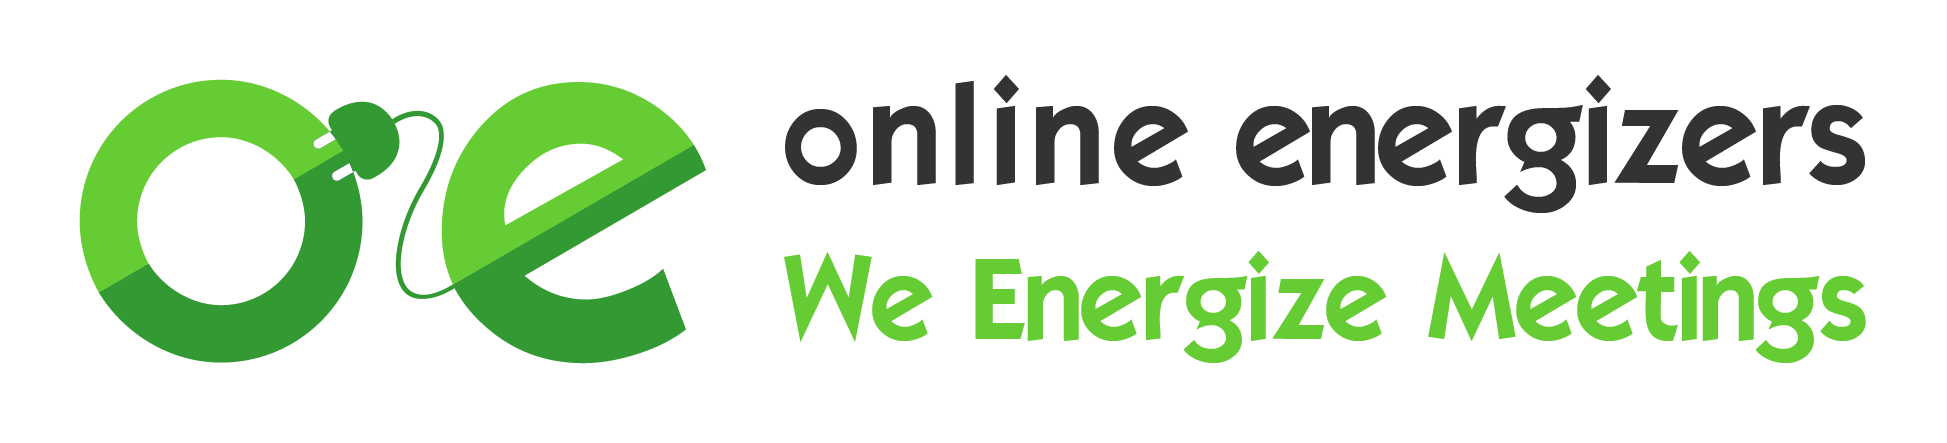 Online Energizers make meetings video conferences nicer and efficient meetings /></div></div></div><div  class=